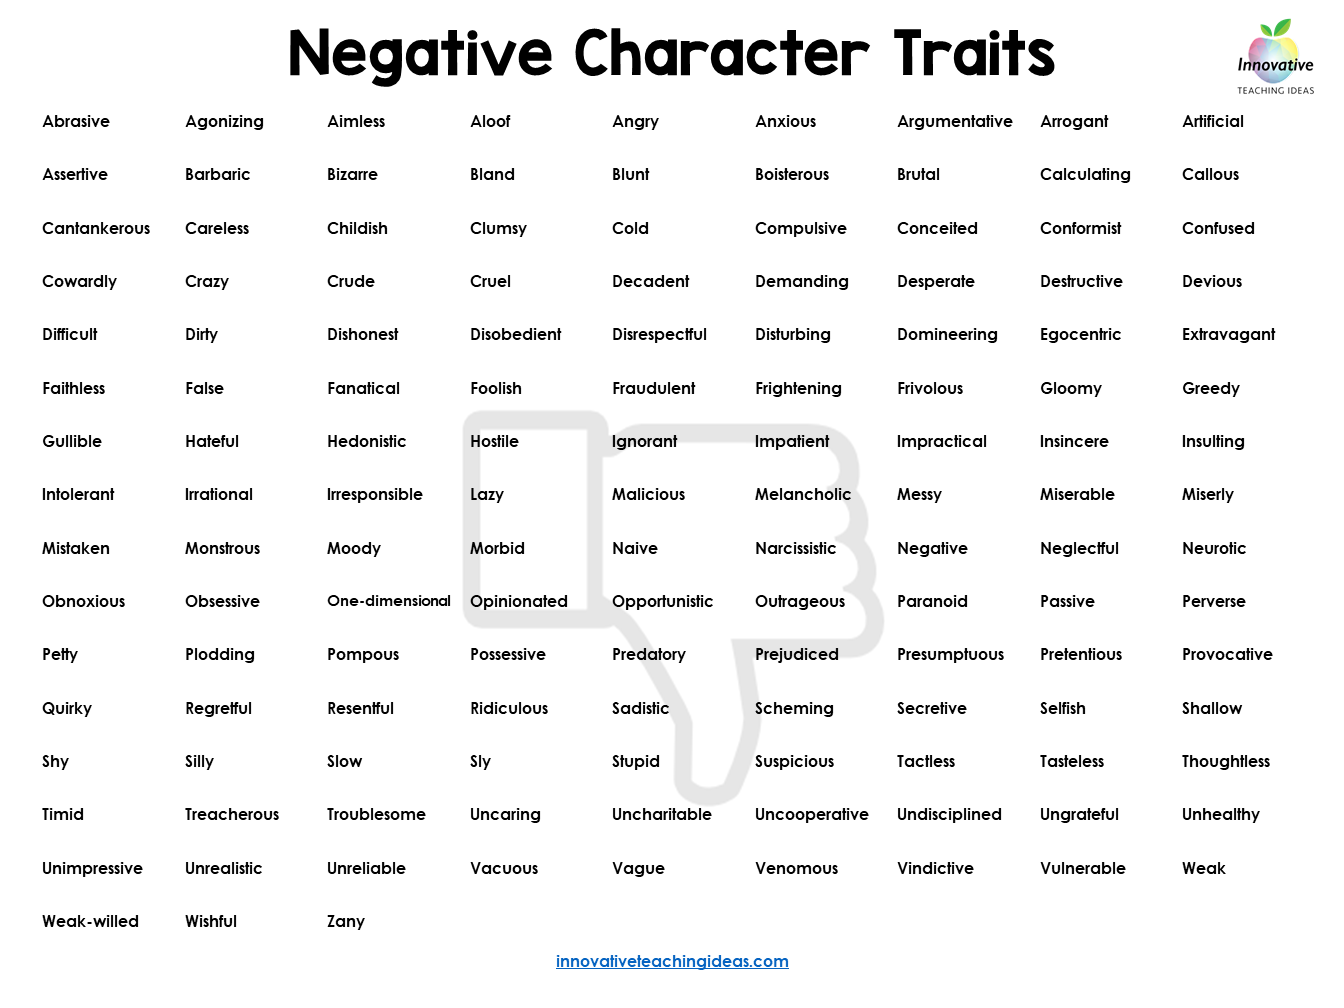 Character Traits List For Teachers And Students Innovative Teaching Ideas